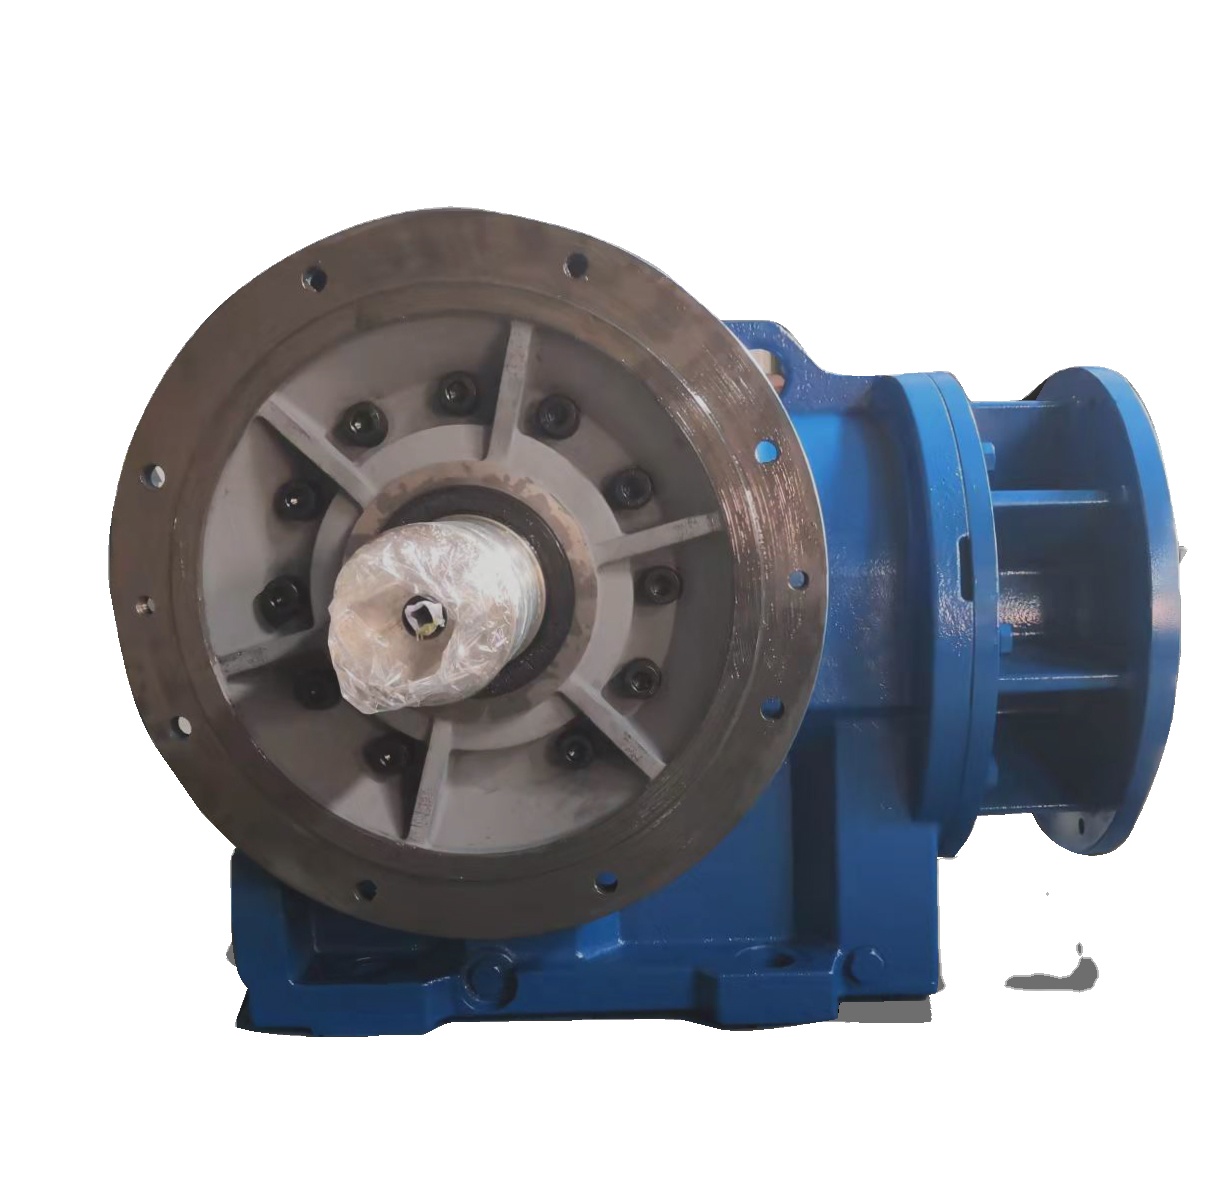 EVERGEAR DRIVE High quality motor with gearbox 1/3 hp